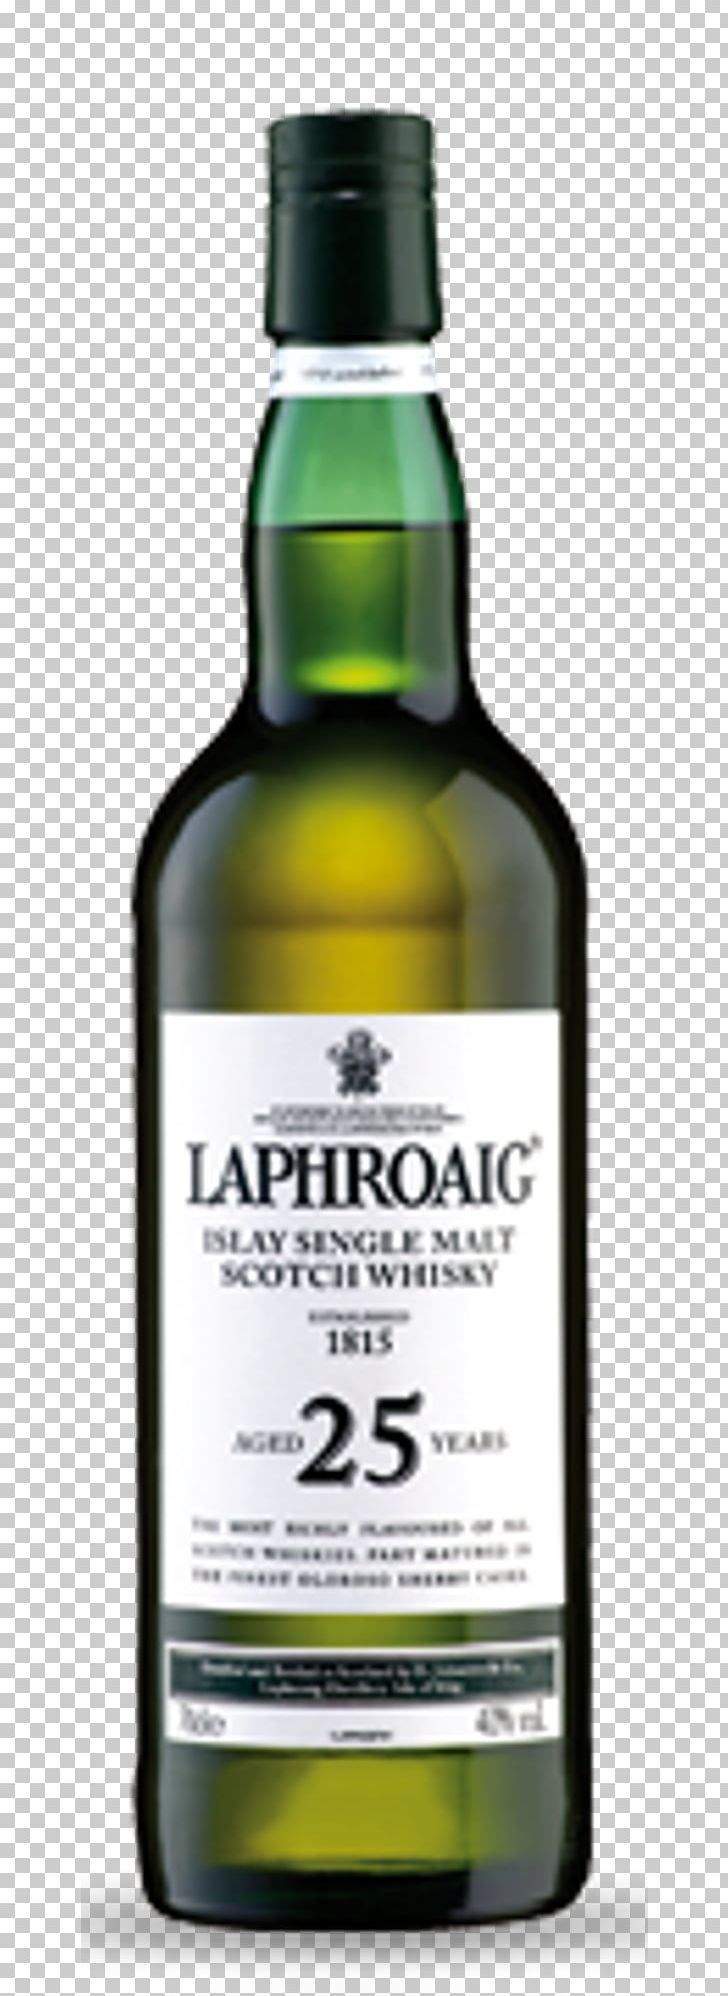 Liqueur Laphroaig Whiskey Islay Whisky Glass Bottle PNG, Clipart, Alcohol, Alcoholic Beverage, Alcoholic Drink, Barrel, Bottle Free PNG Download